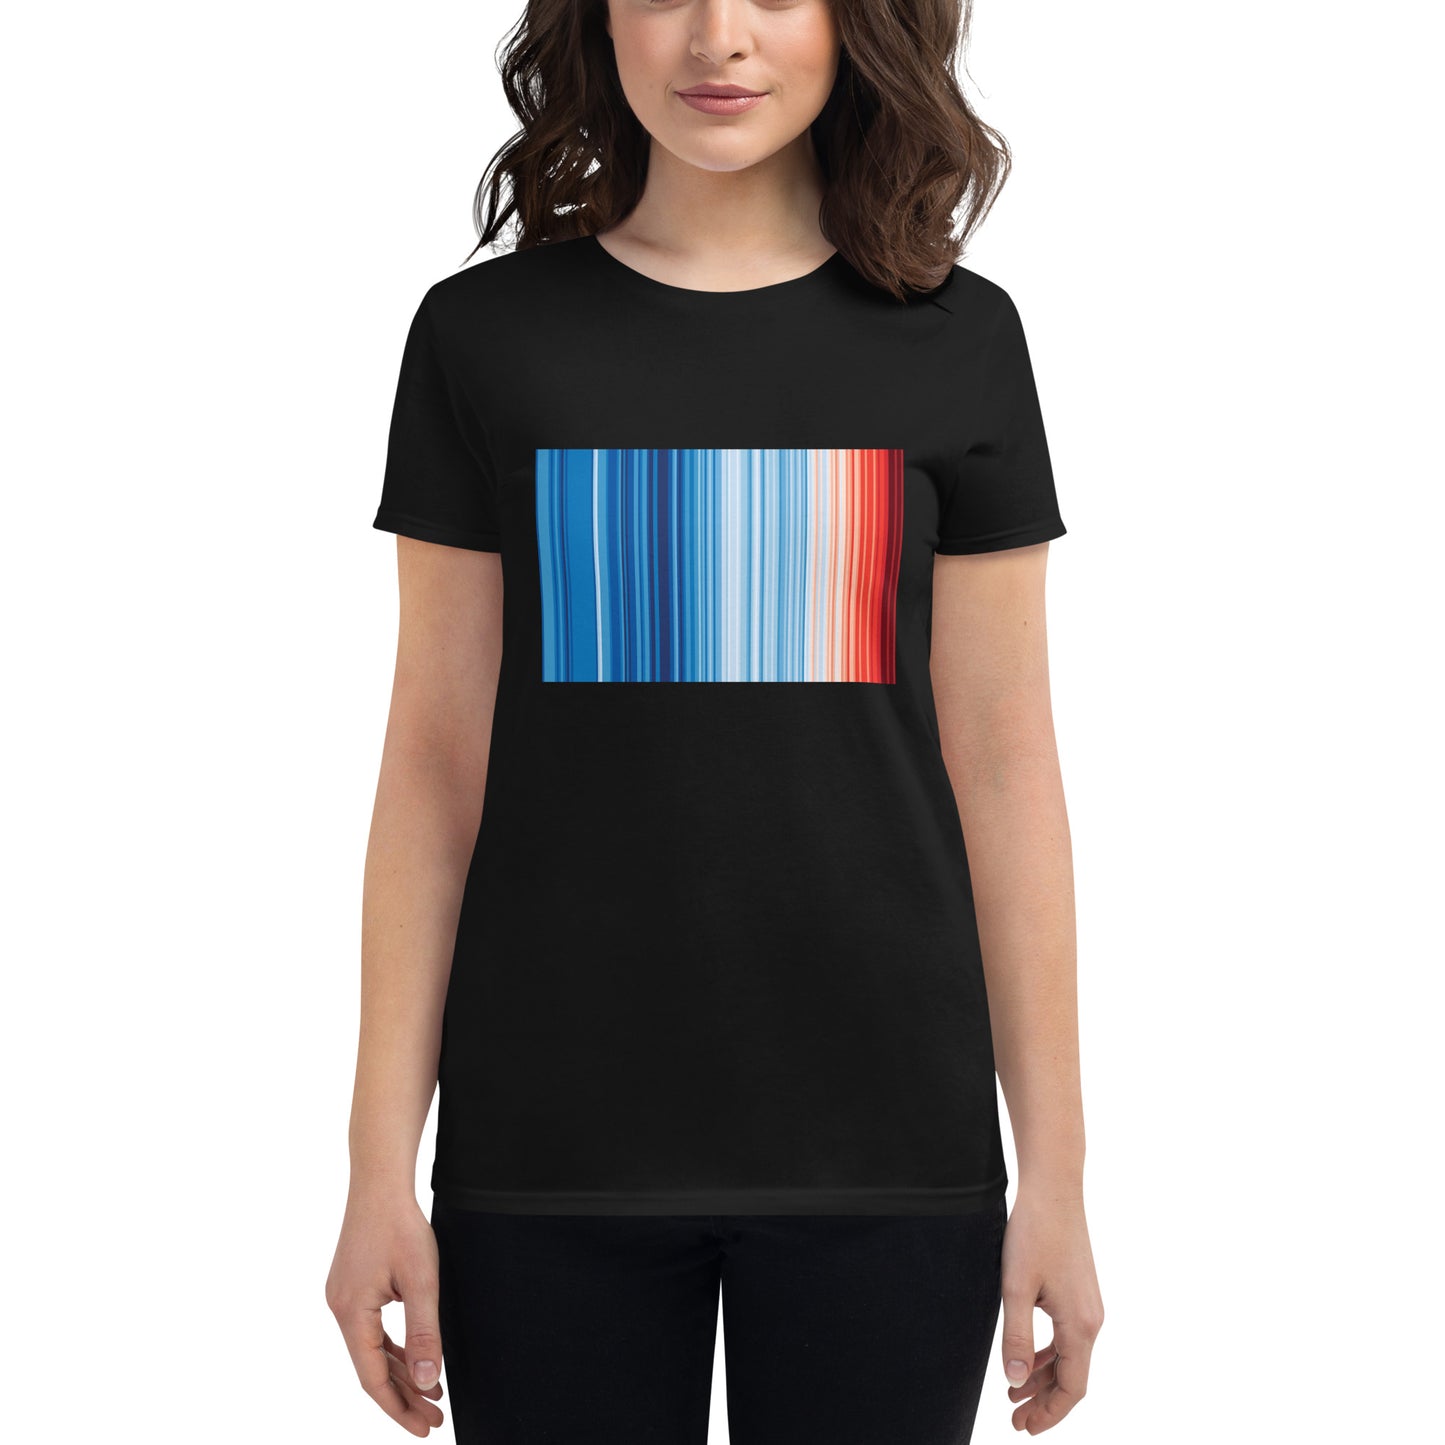 Climate Change Global Warming Stripes - Sustainably Made Women's Black & White T-shirt